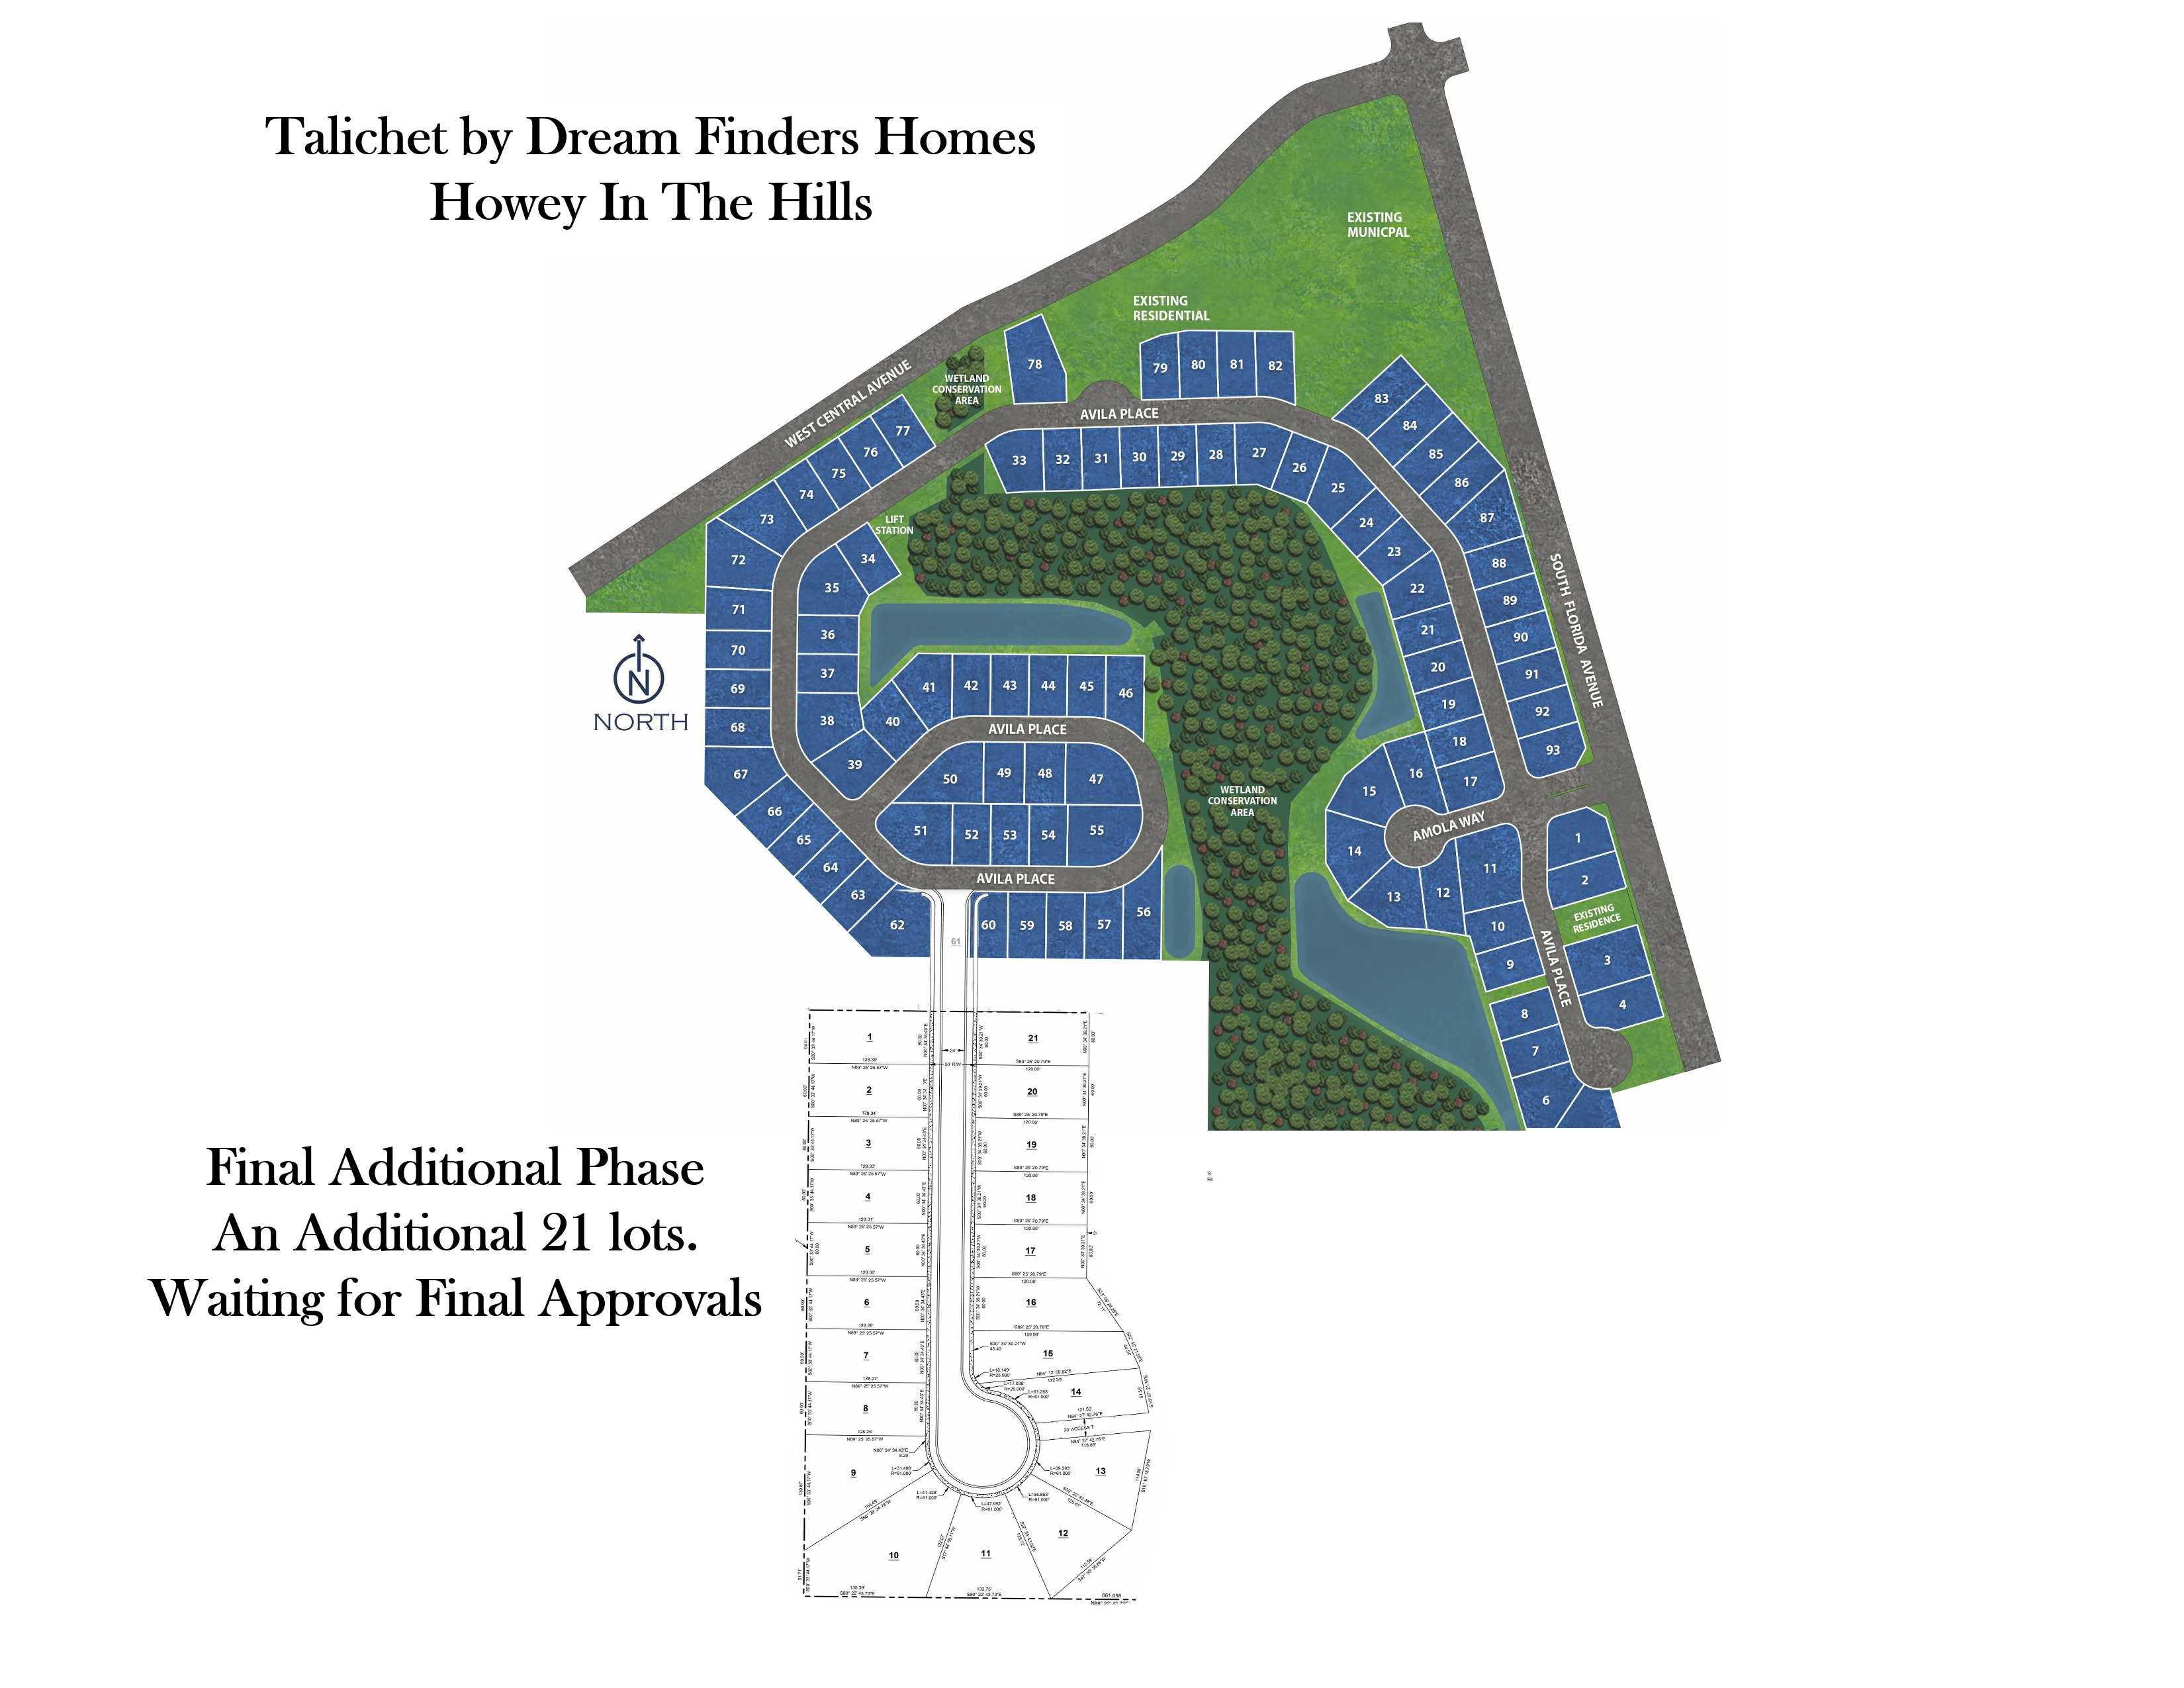 Talichet_by_Dream_Finders_Homes_in_Howey_In_The_Hills_Final_Phase.jpg